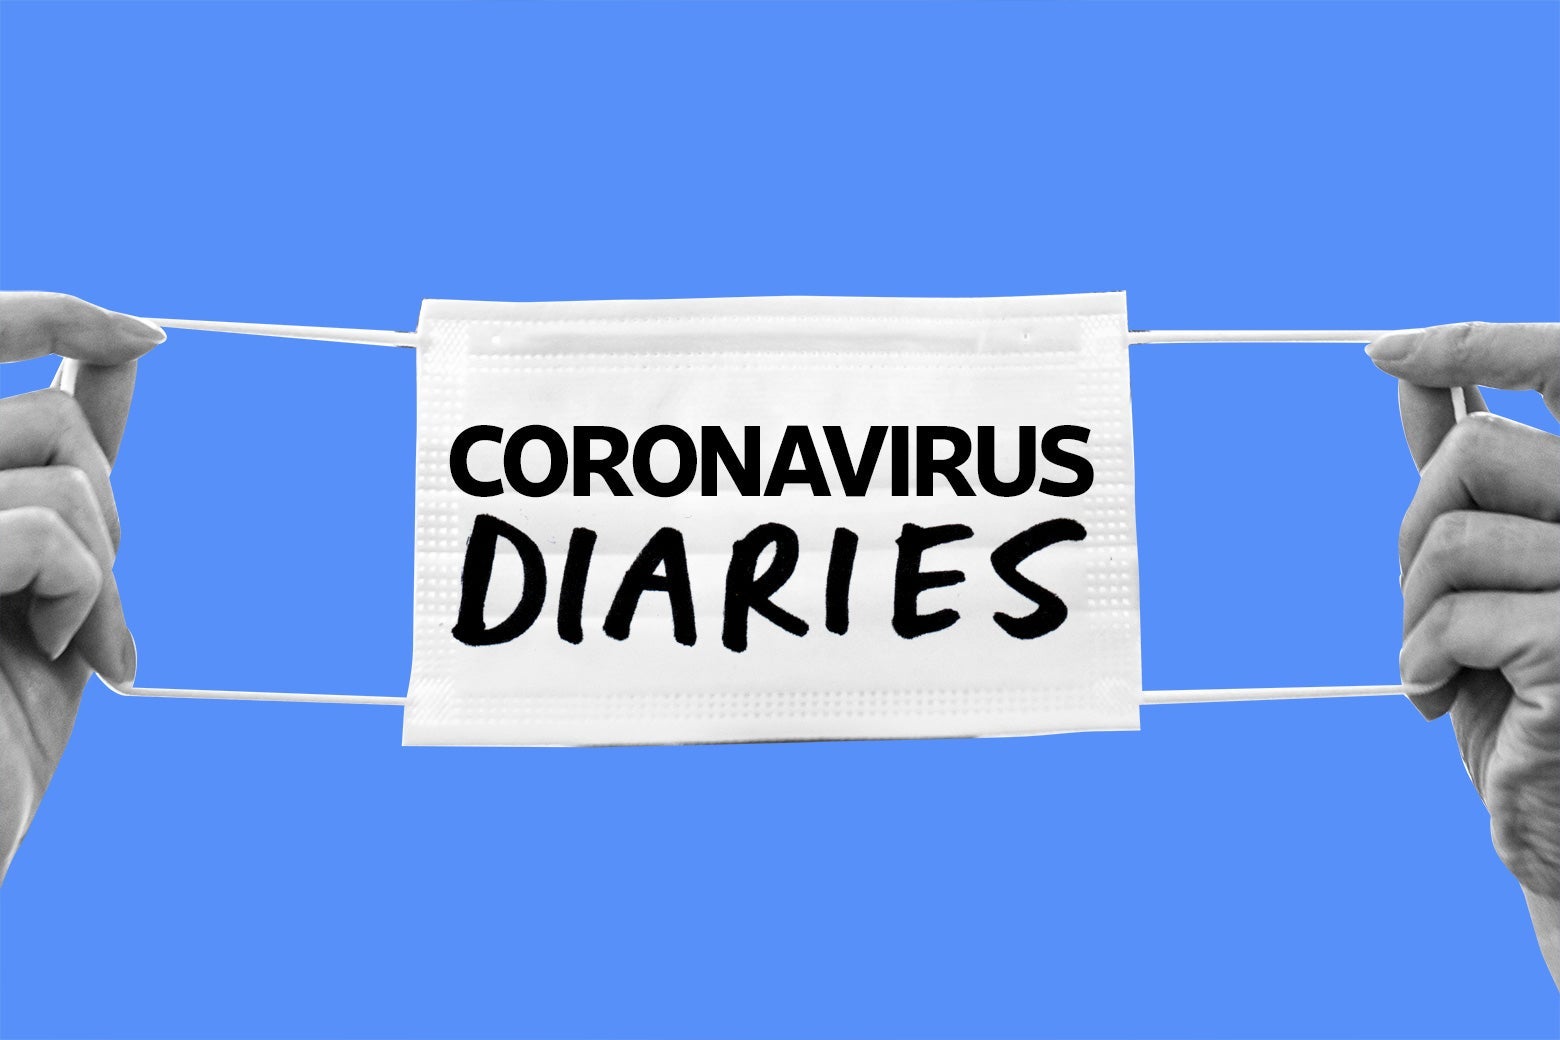 A mask held between two hands that says "Coronavirus Diaries"